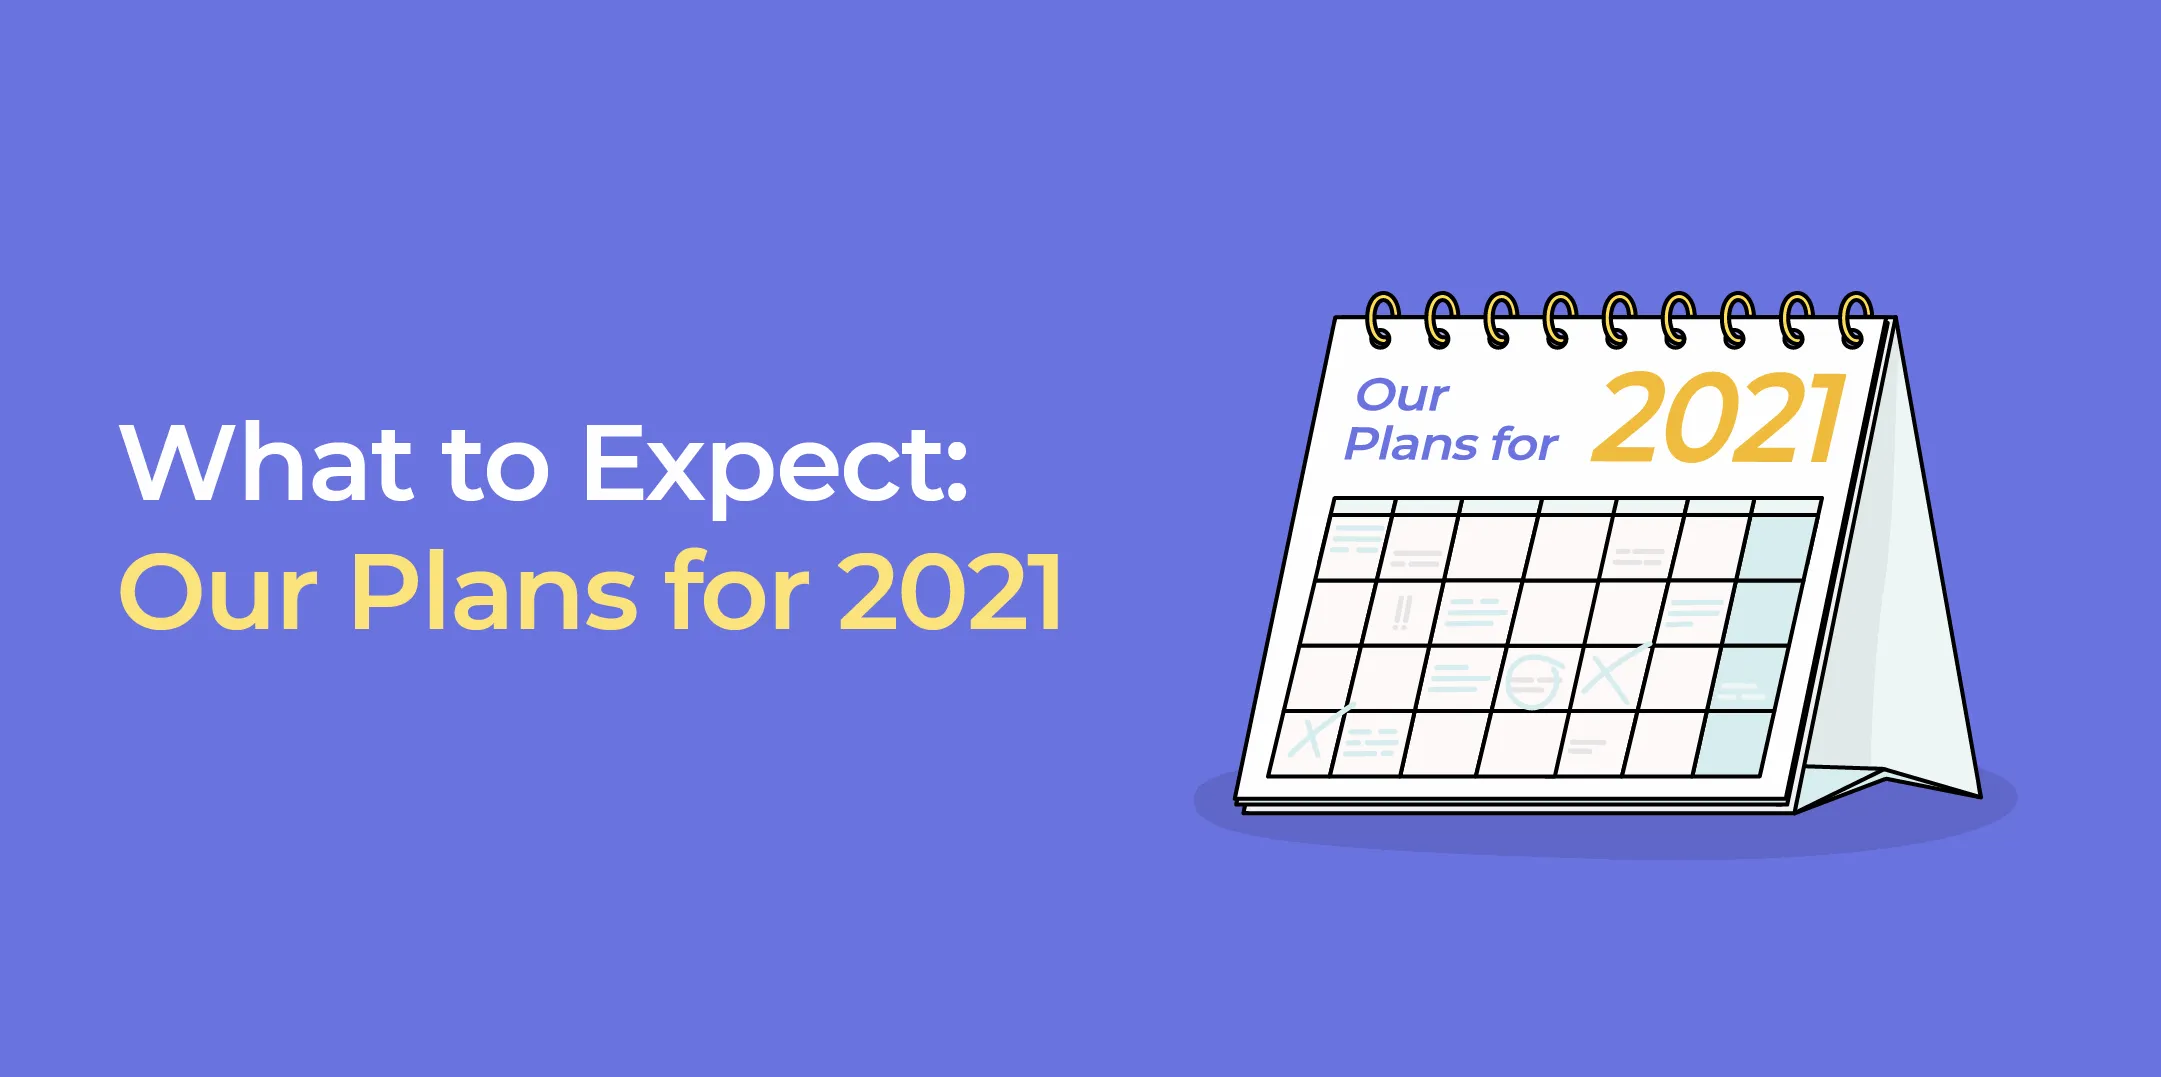 What to Expect in 2021? | Bankera Blog